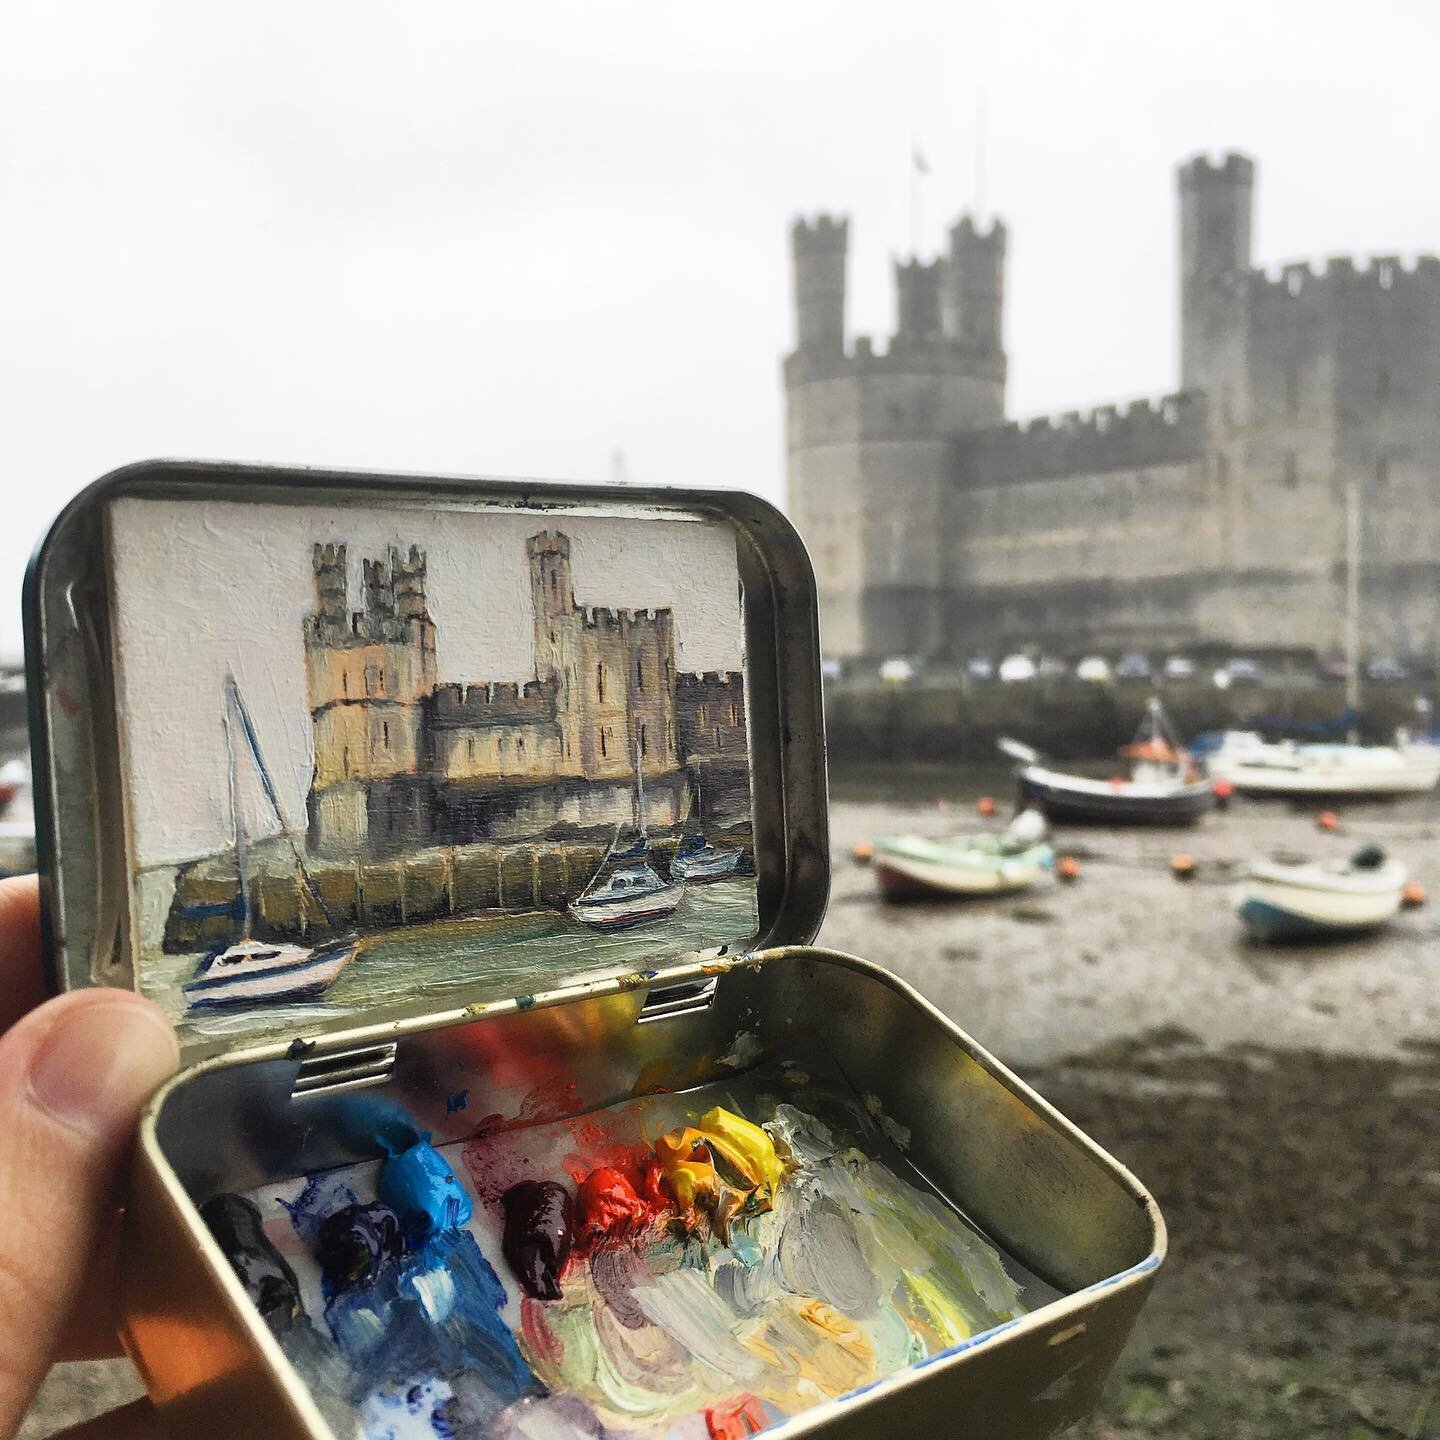 I miss castles. 🏰 I toddled around them a lot as a kid, but rarely as an adult. Seeing them is like stepping back into my childhood. (Swipe to see Baby Heidi surveying her domain).
Caernarfon Castle, North Wales, August 2017. (Sold)